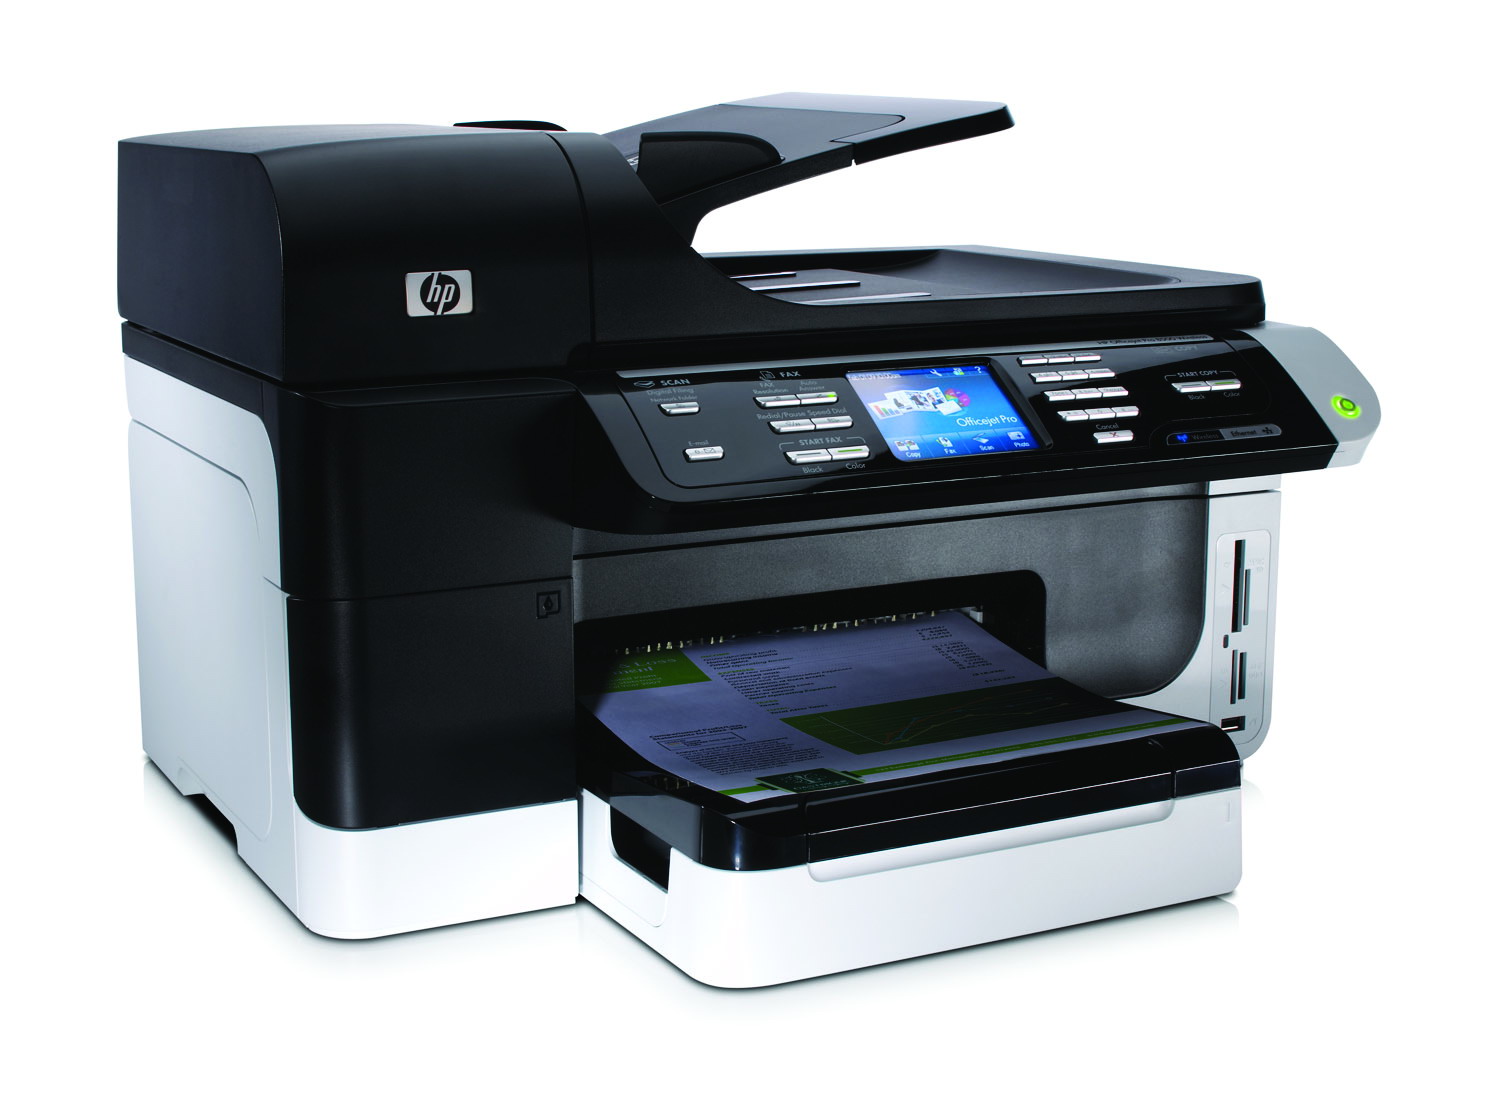   HP Officejet Pro 8500 Wireless All-in-One Printer - A909g (CB023A)  2